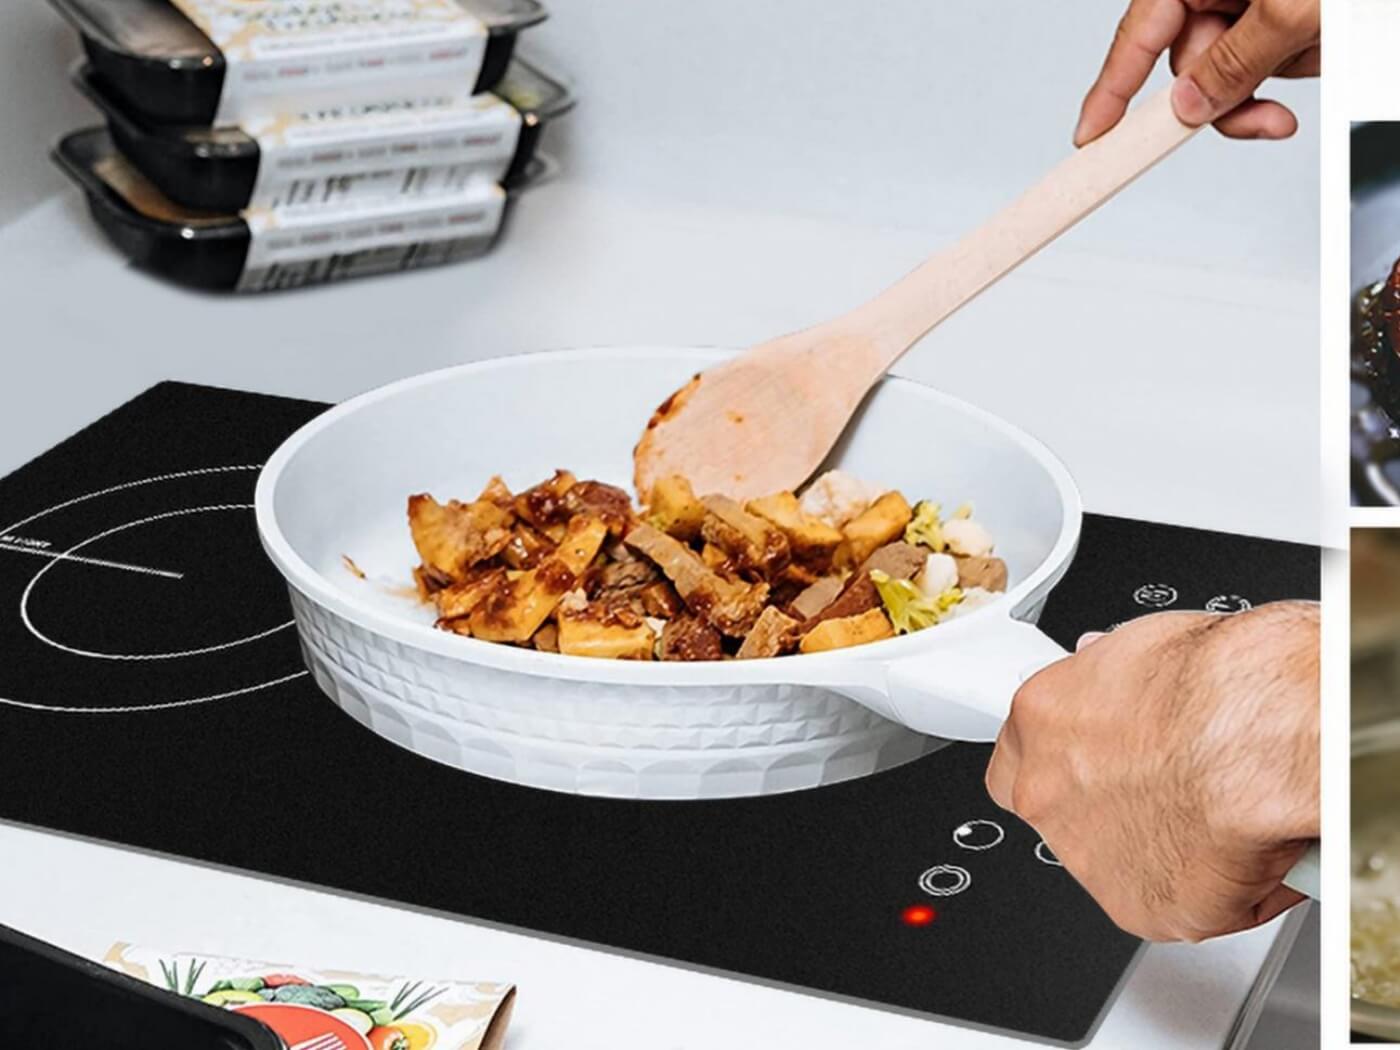 How to Choose the Right Cooktop for Your Home Cooking